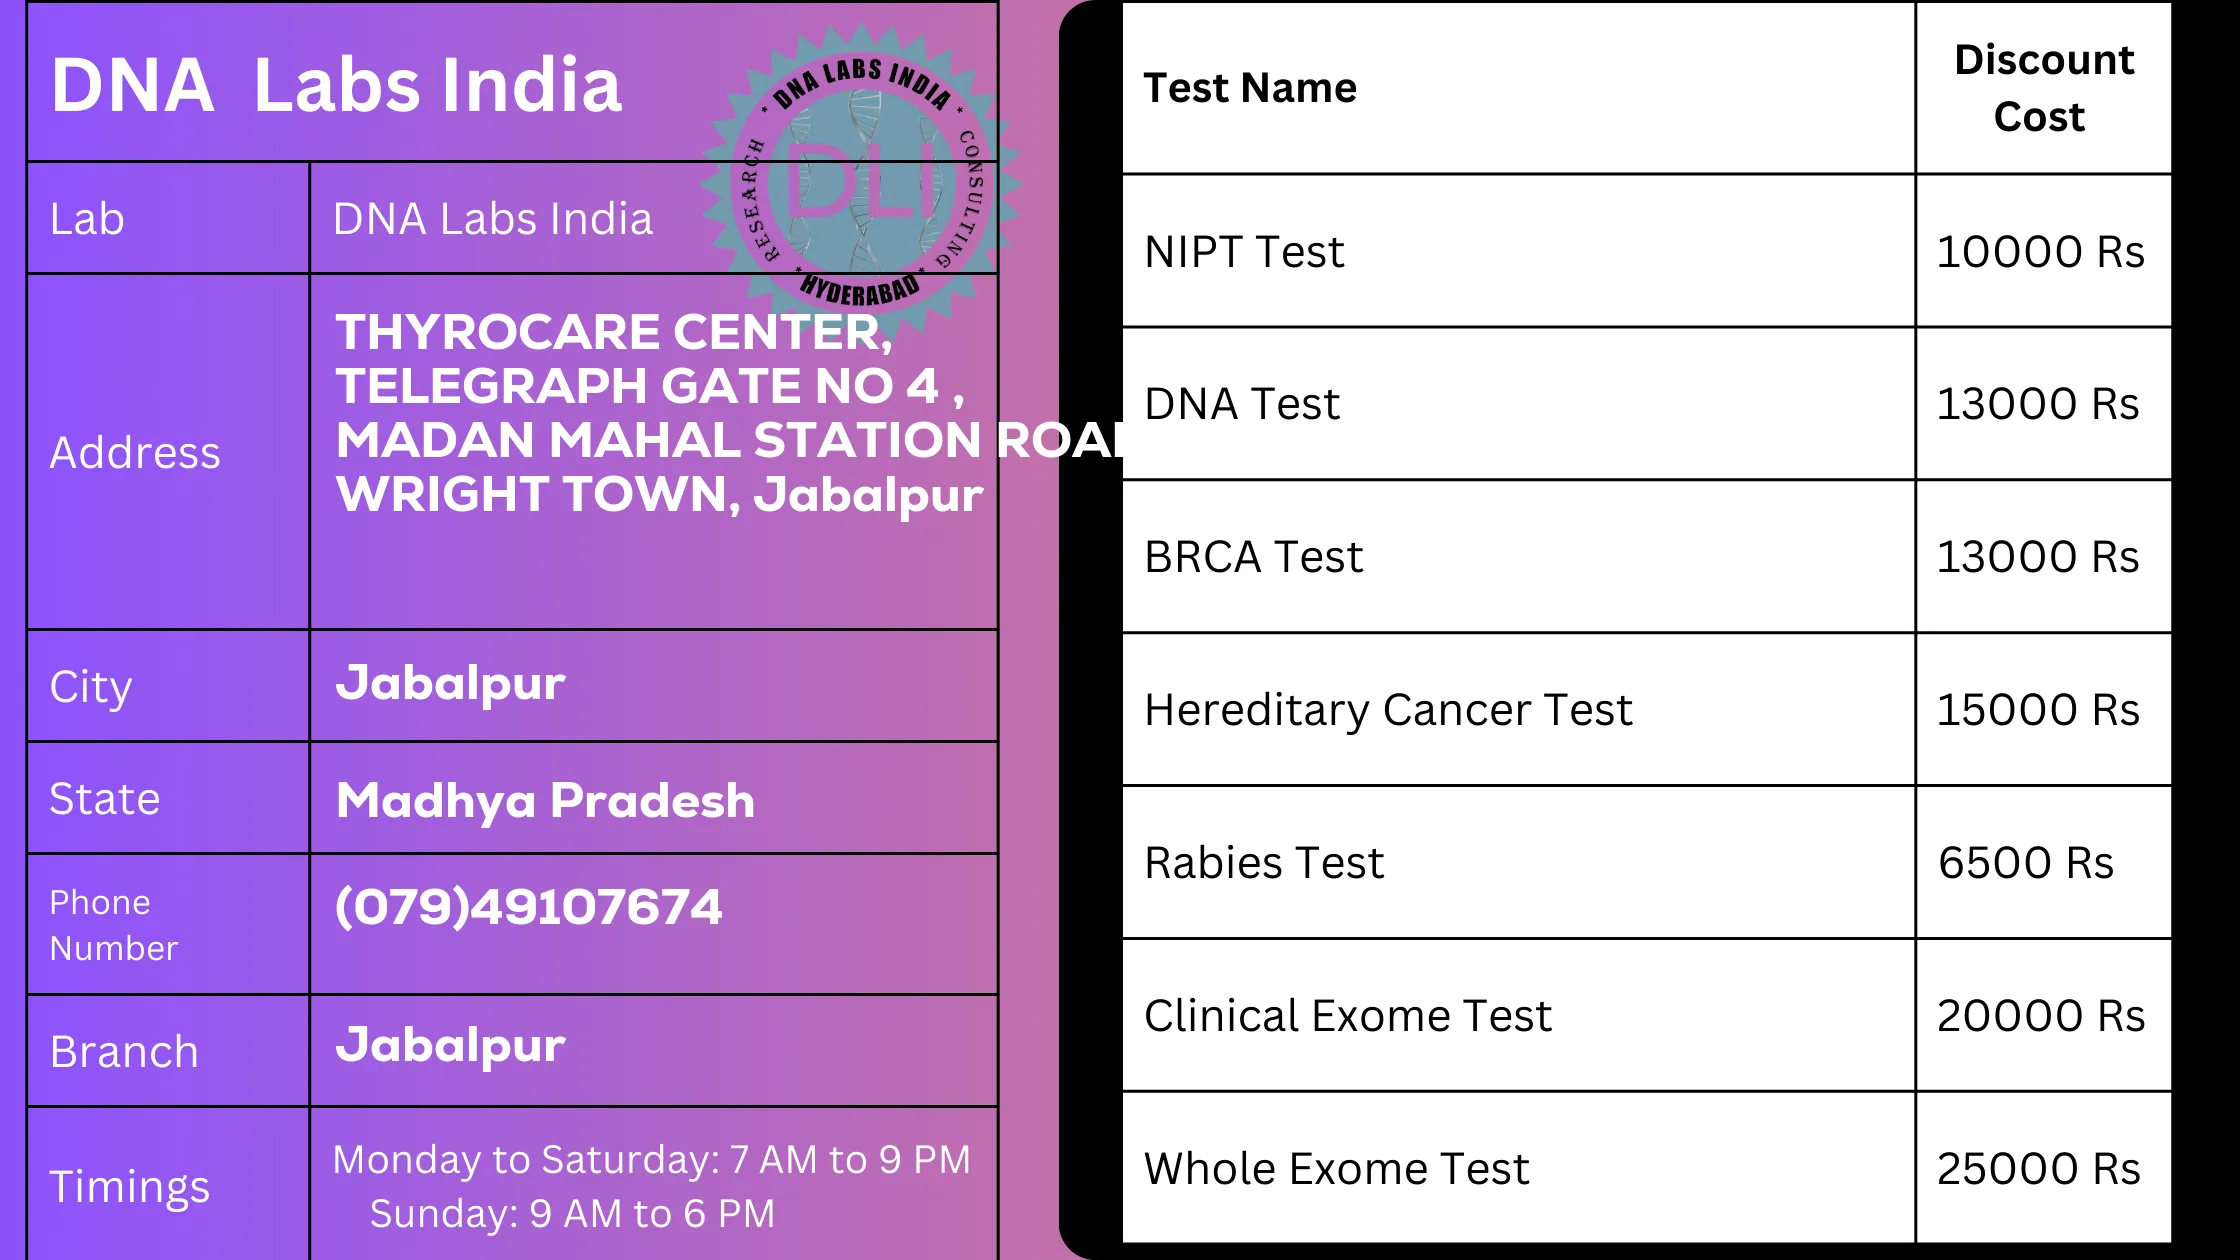 DNA Labs India - Jabalpur: Your Trusted Genetic Testing Partner